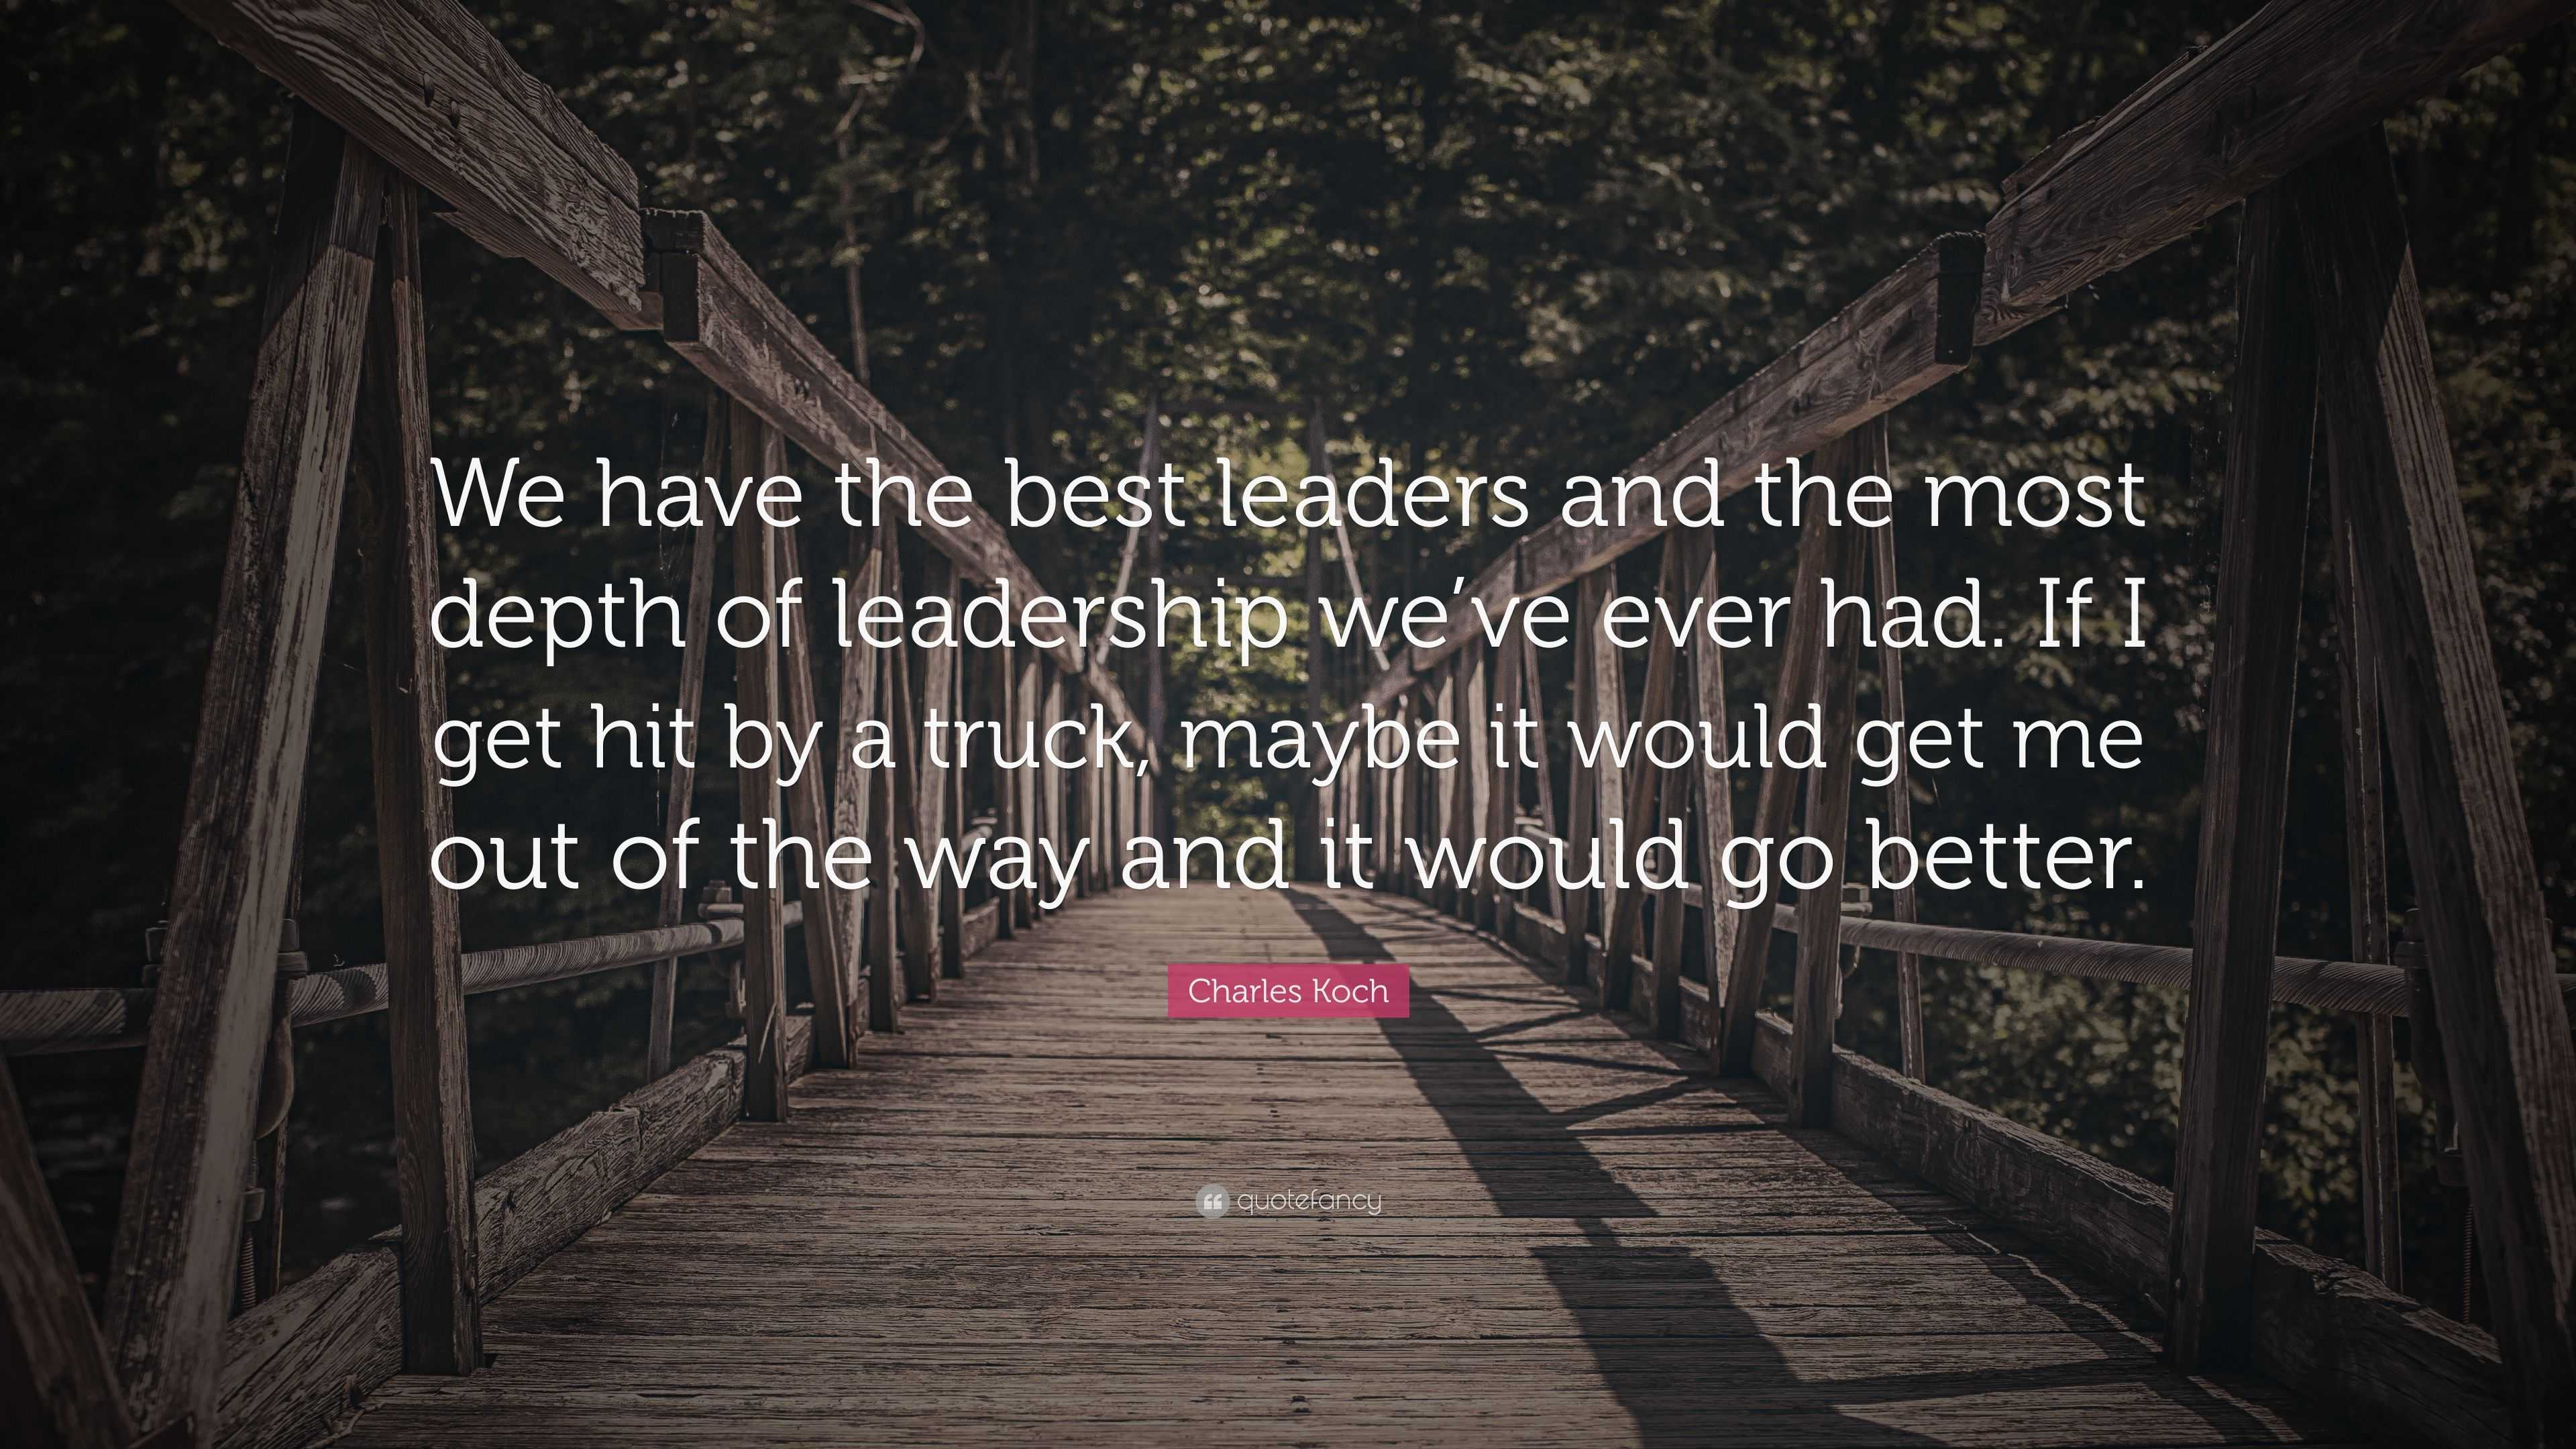 Charles Koch Quote: “We have the best leaders and the most depth of ...